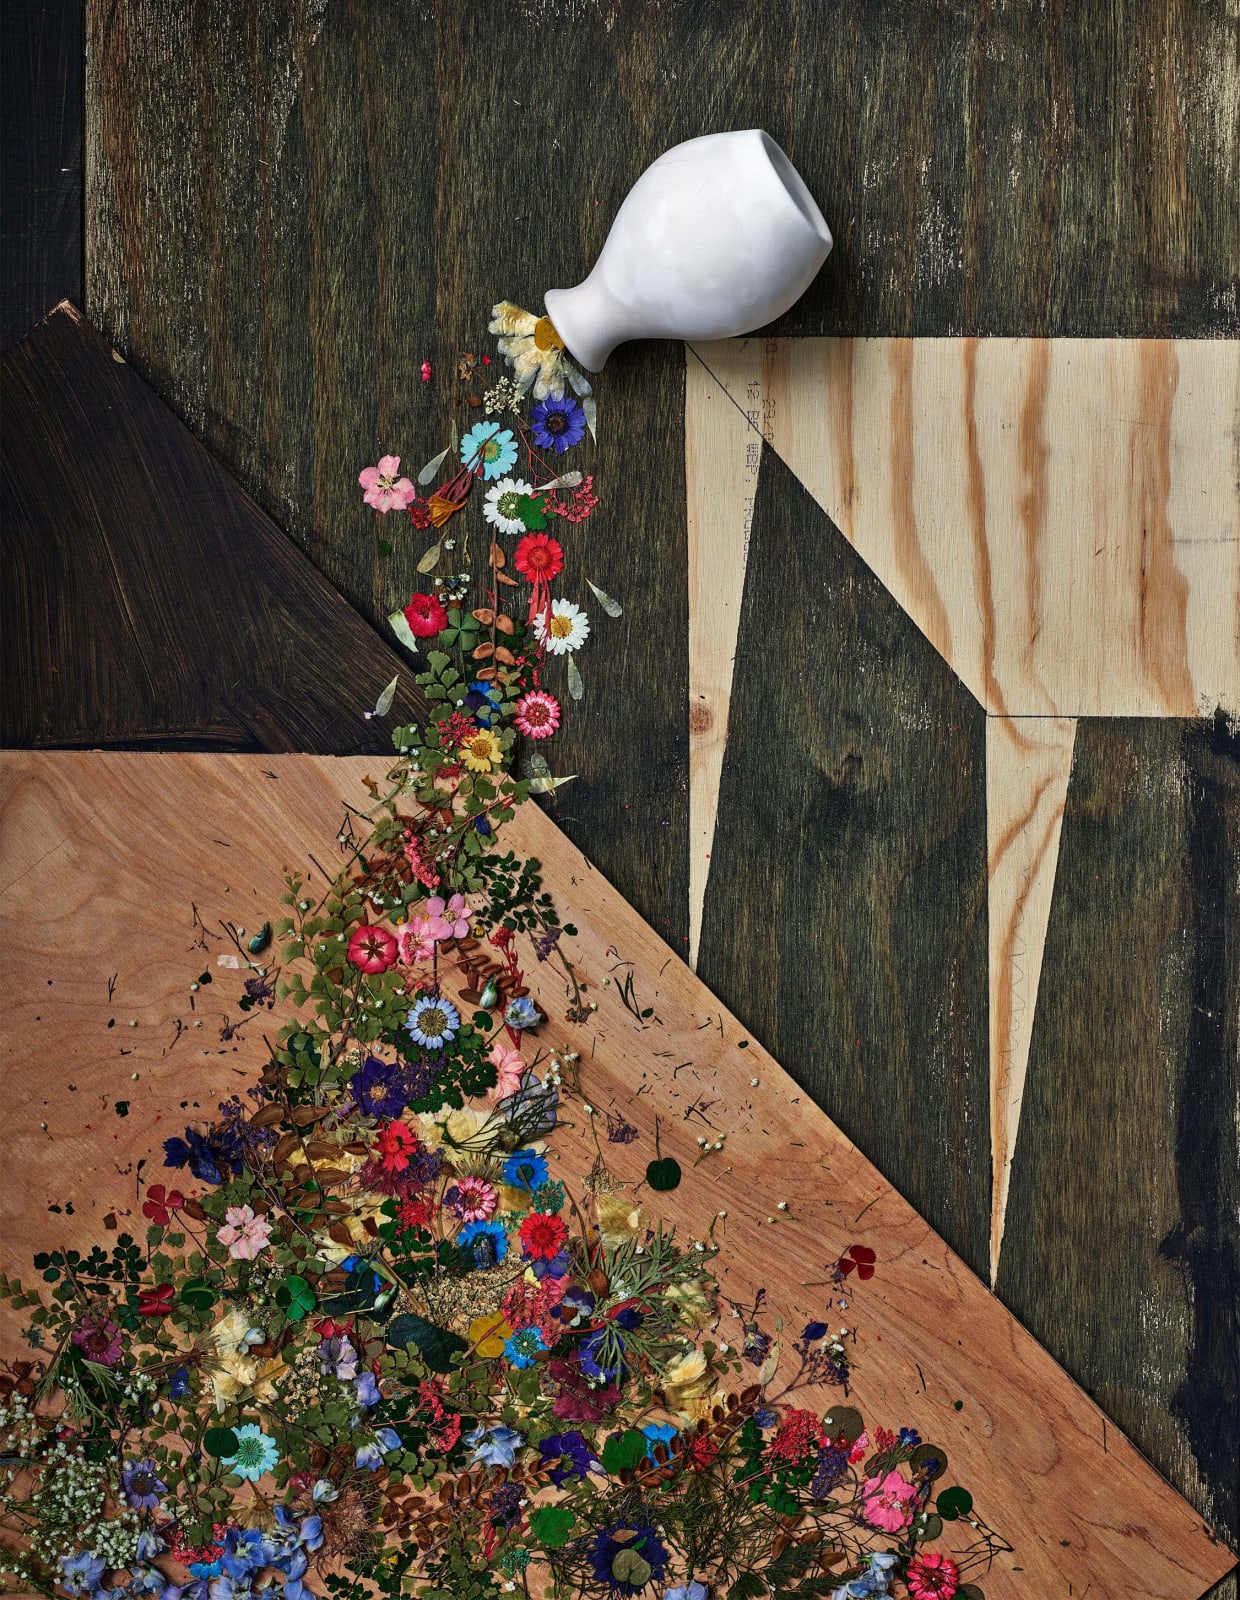 Abelardo Morell Flowers for Lisa #30 two dimensional illusion of vase of flowers tipping and spilling off table made of flat plywood